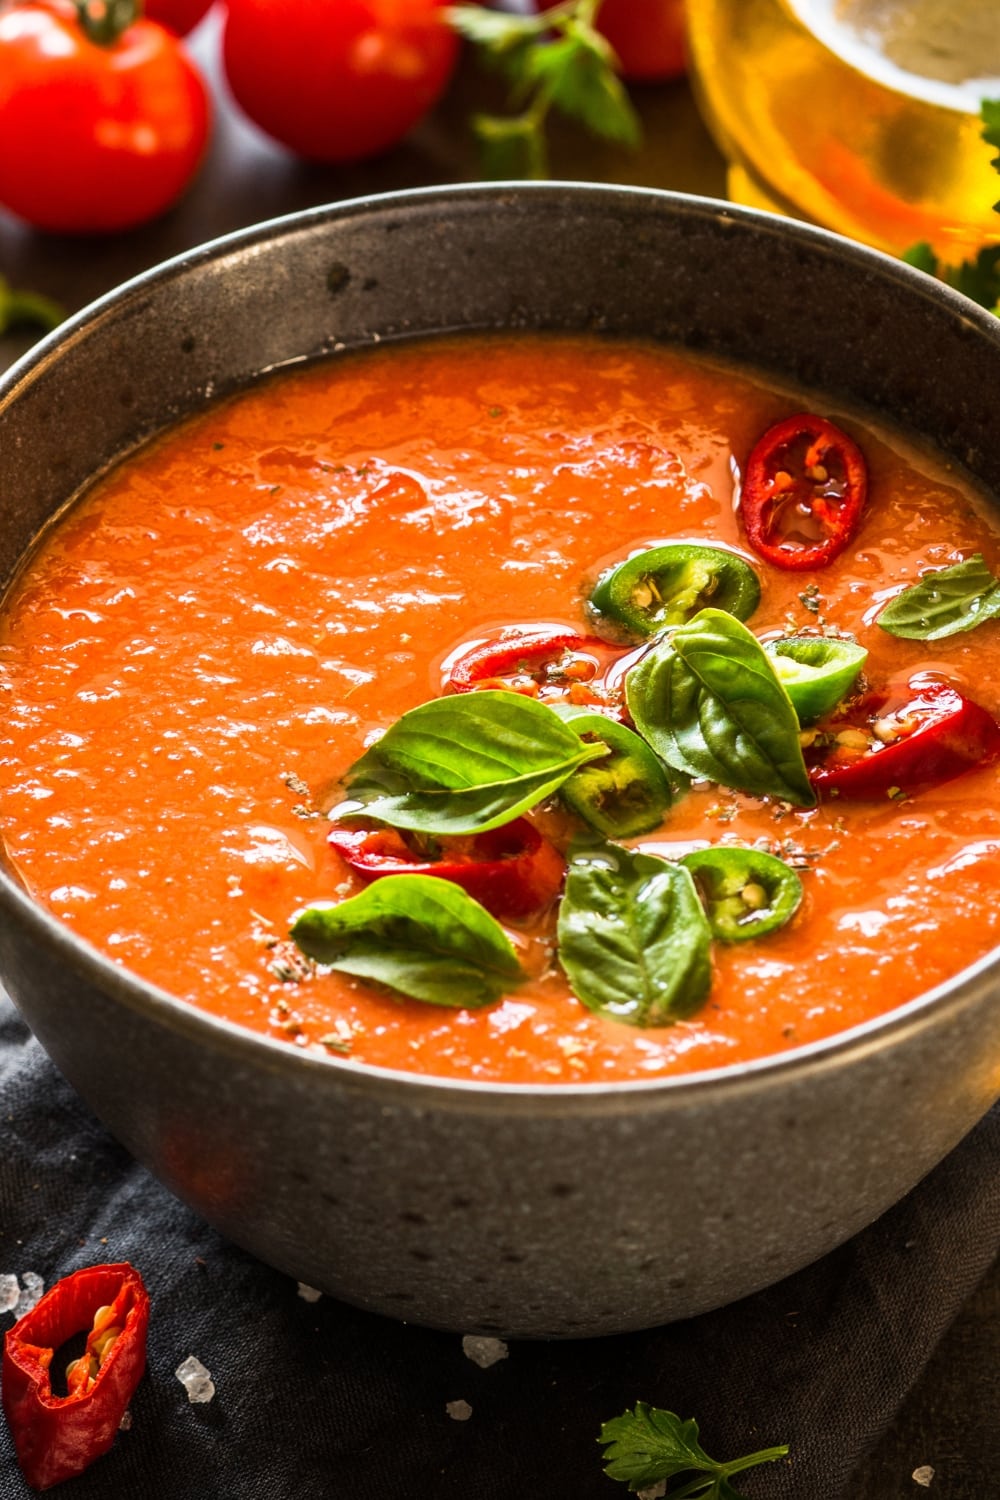 Gazpacho Tomato Soup with Chili Peppers